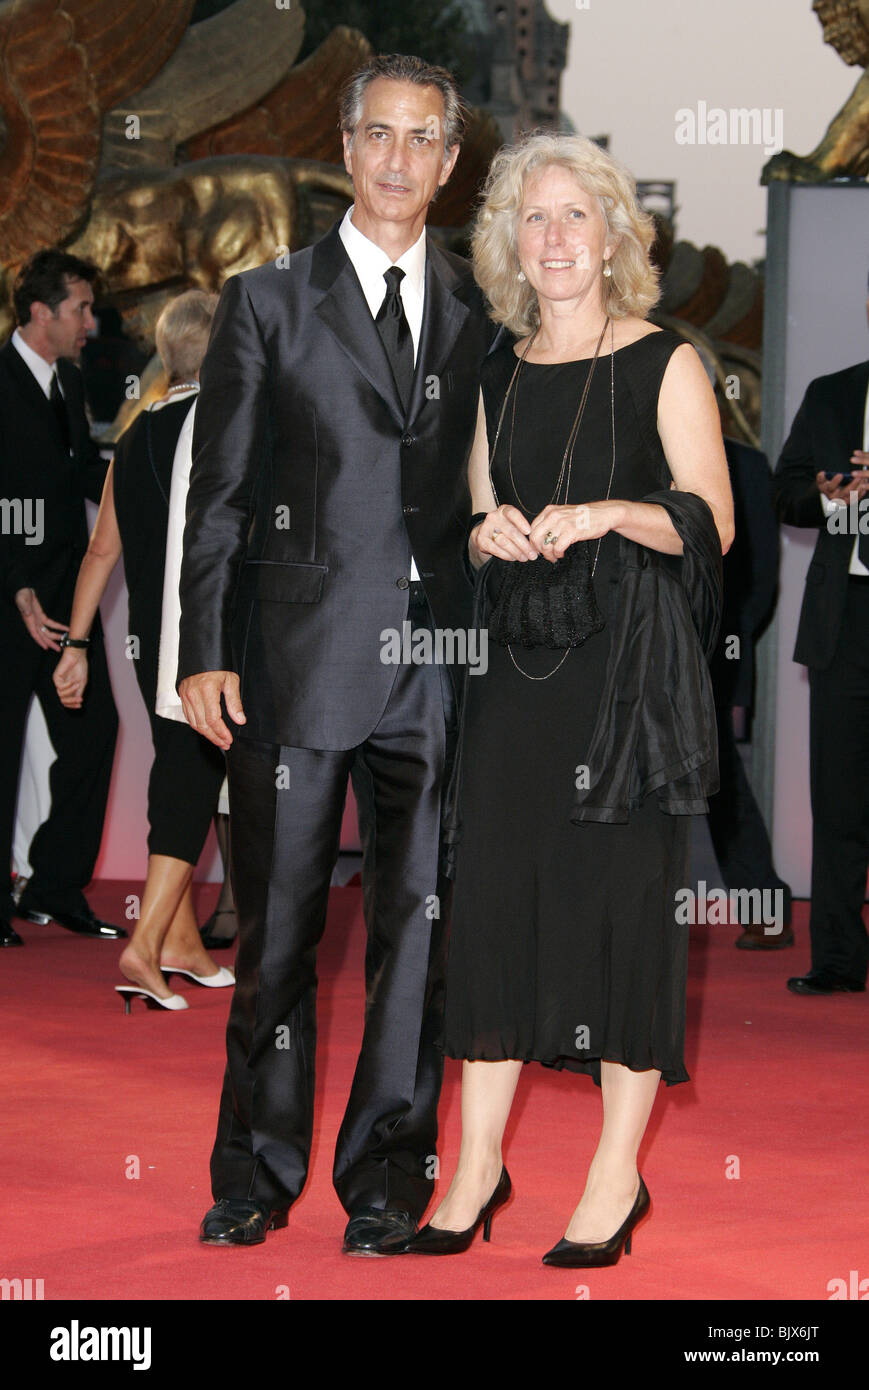 DAVID STRATHAIRN & WIFE GOOD NIGHT AND GOOD LUCK PRE PALAZZO DEL CINEMA LIDO VENICE ITALY 01 September 2005 Stock Photo